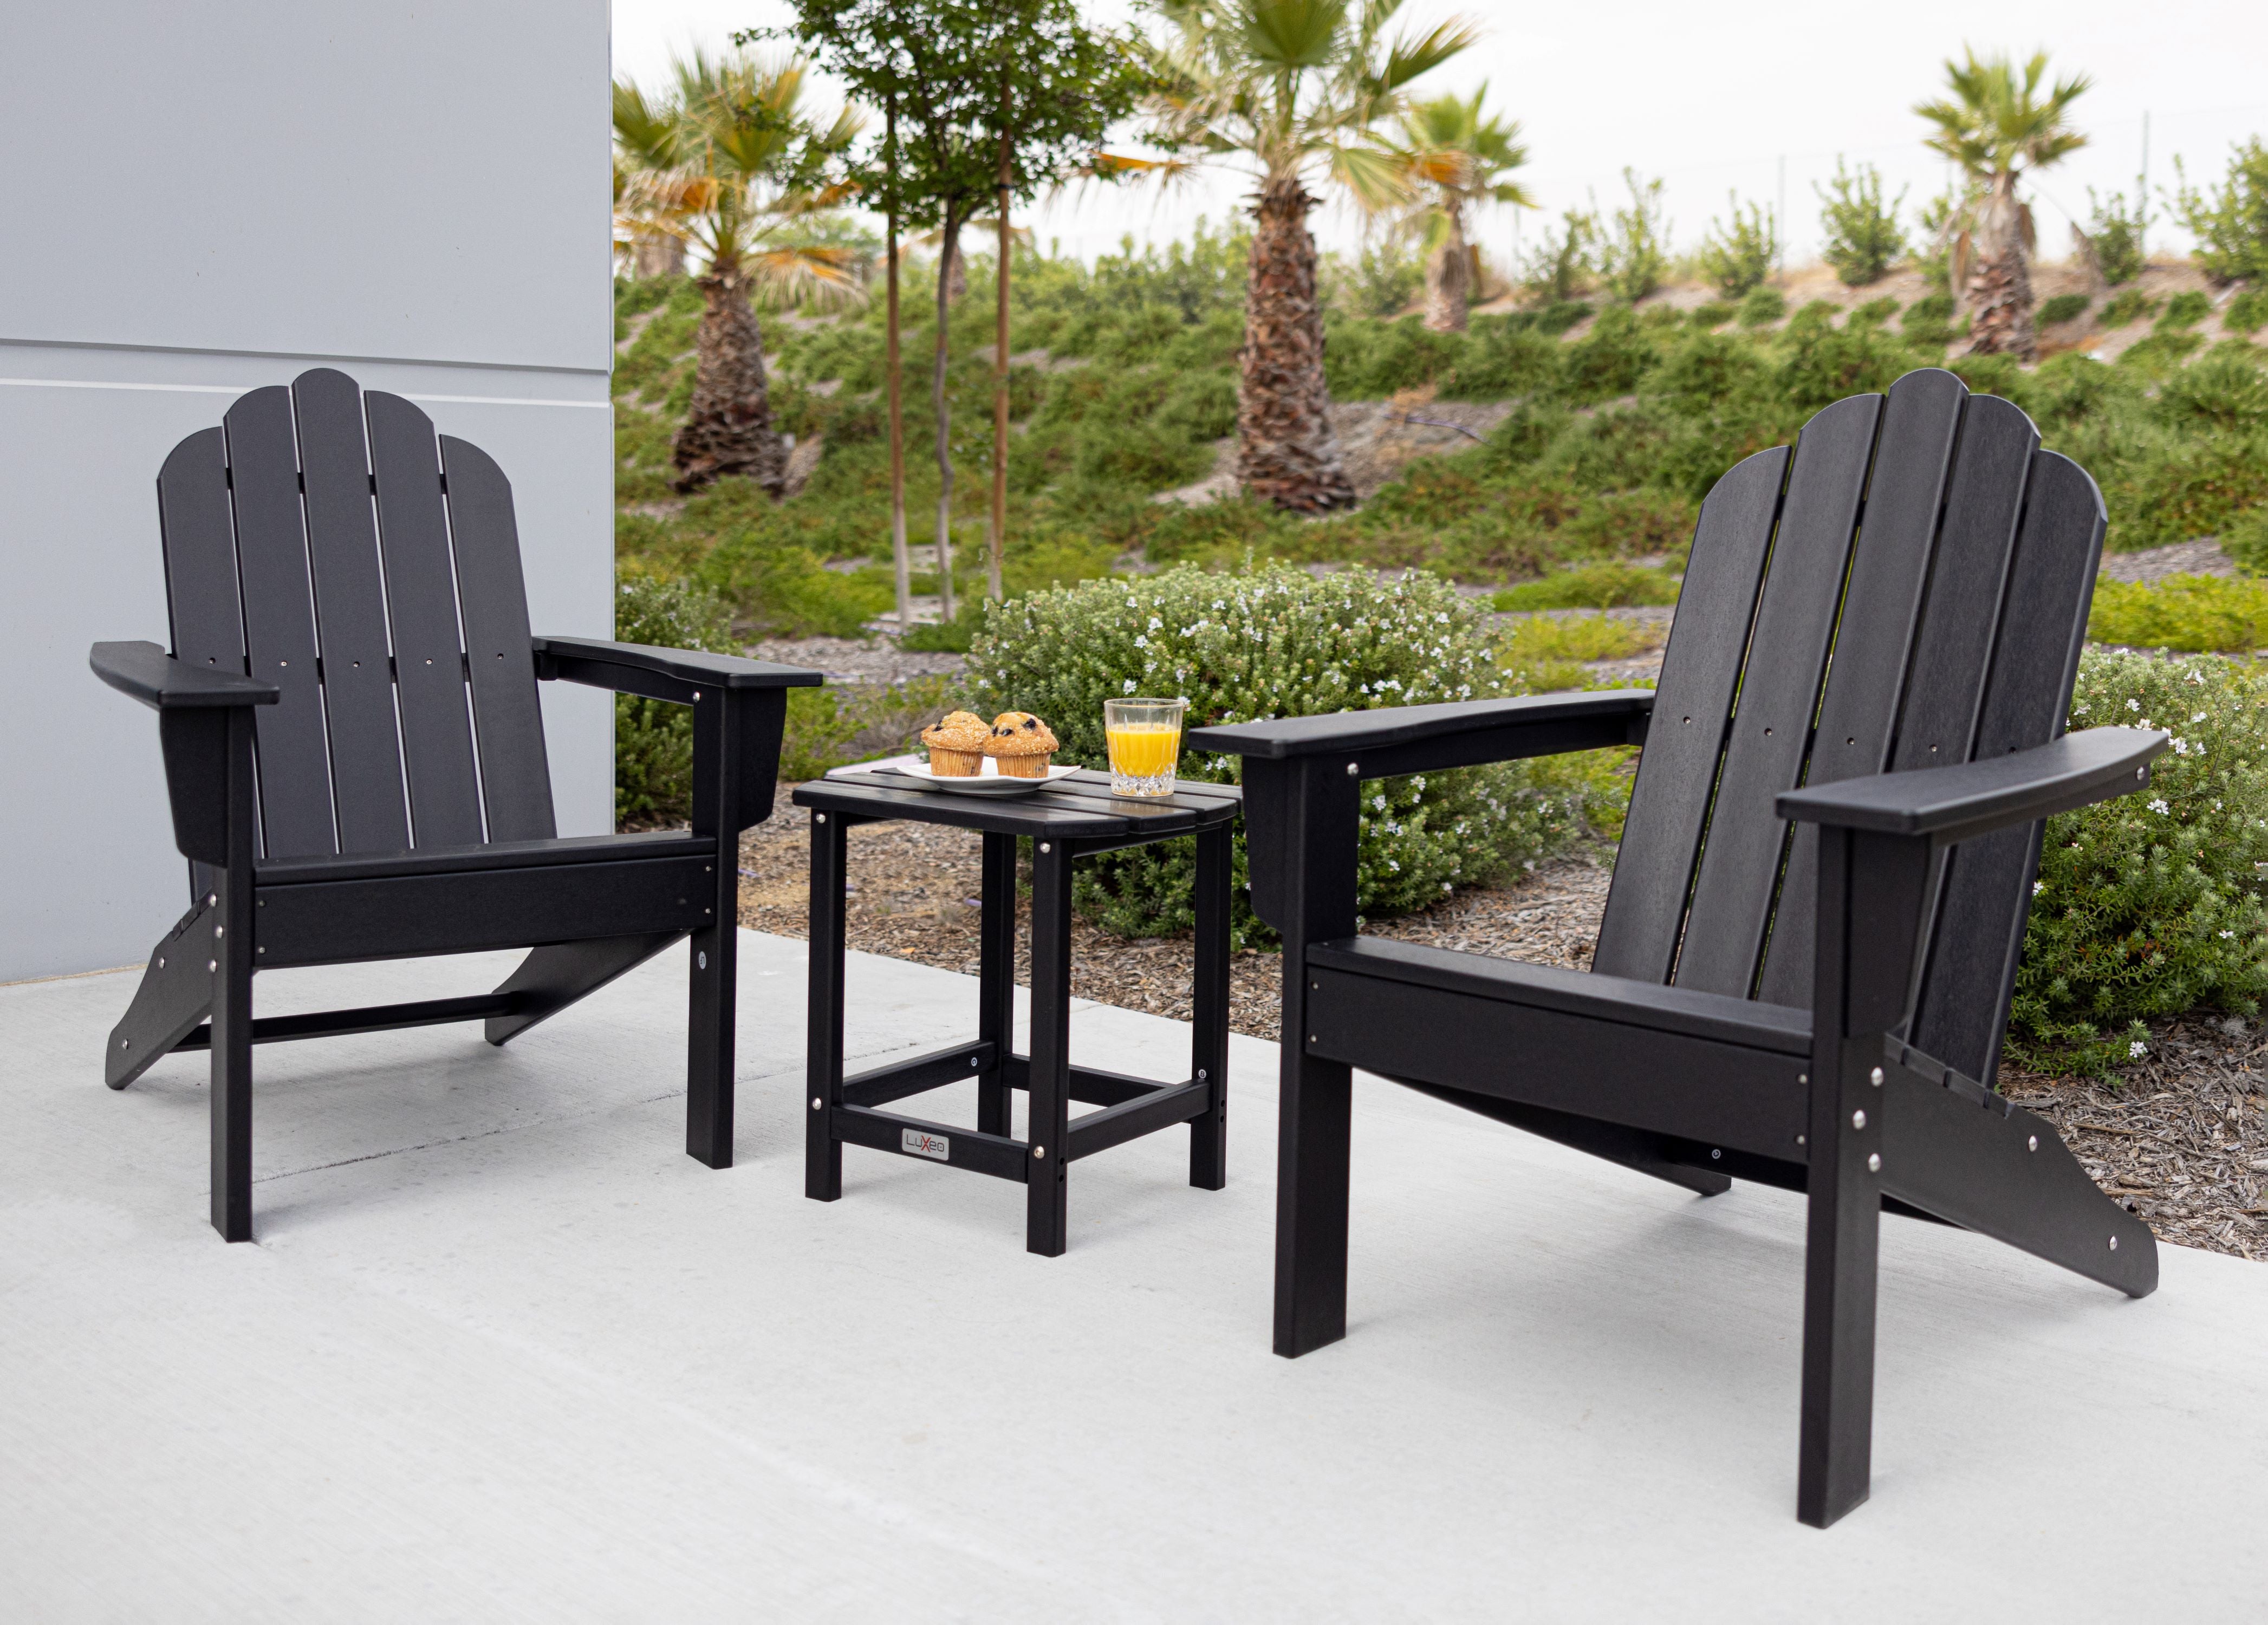 Marina HDPE Recycled Plastic Outdoor Patio Adirondack Chair and Table Set (3-Piece)